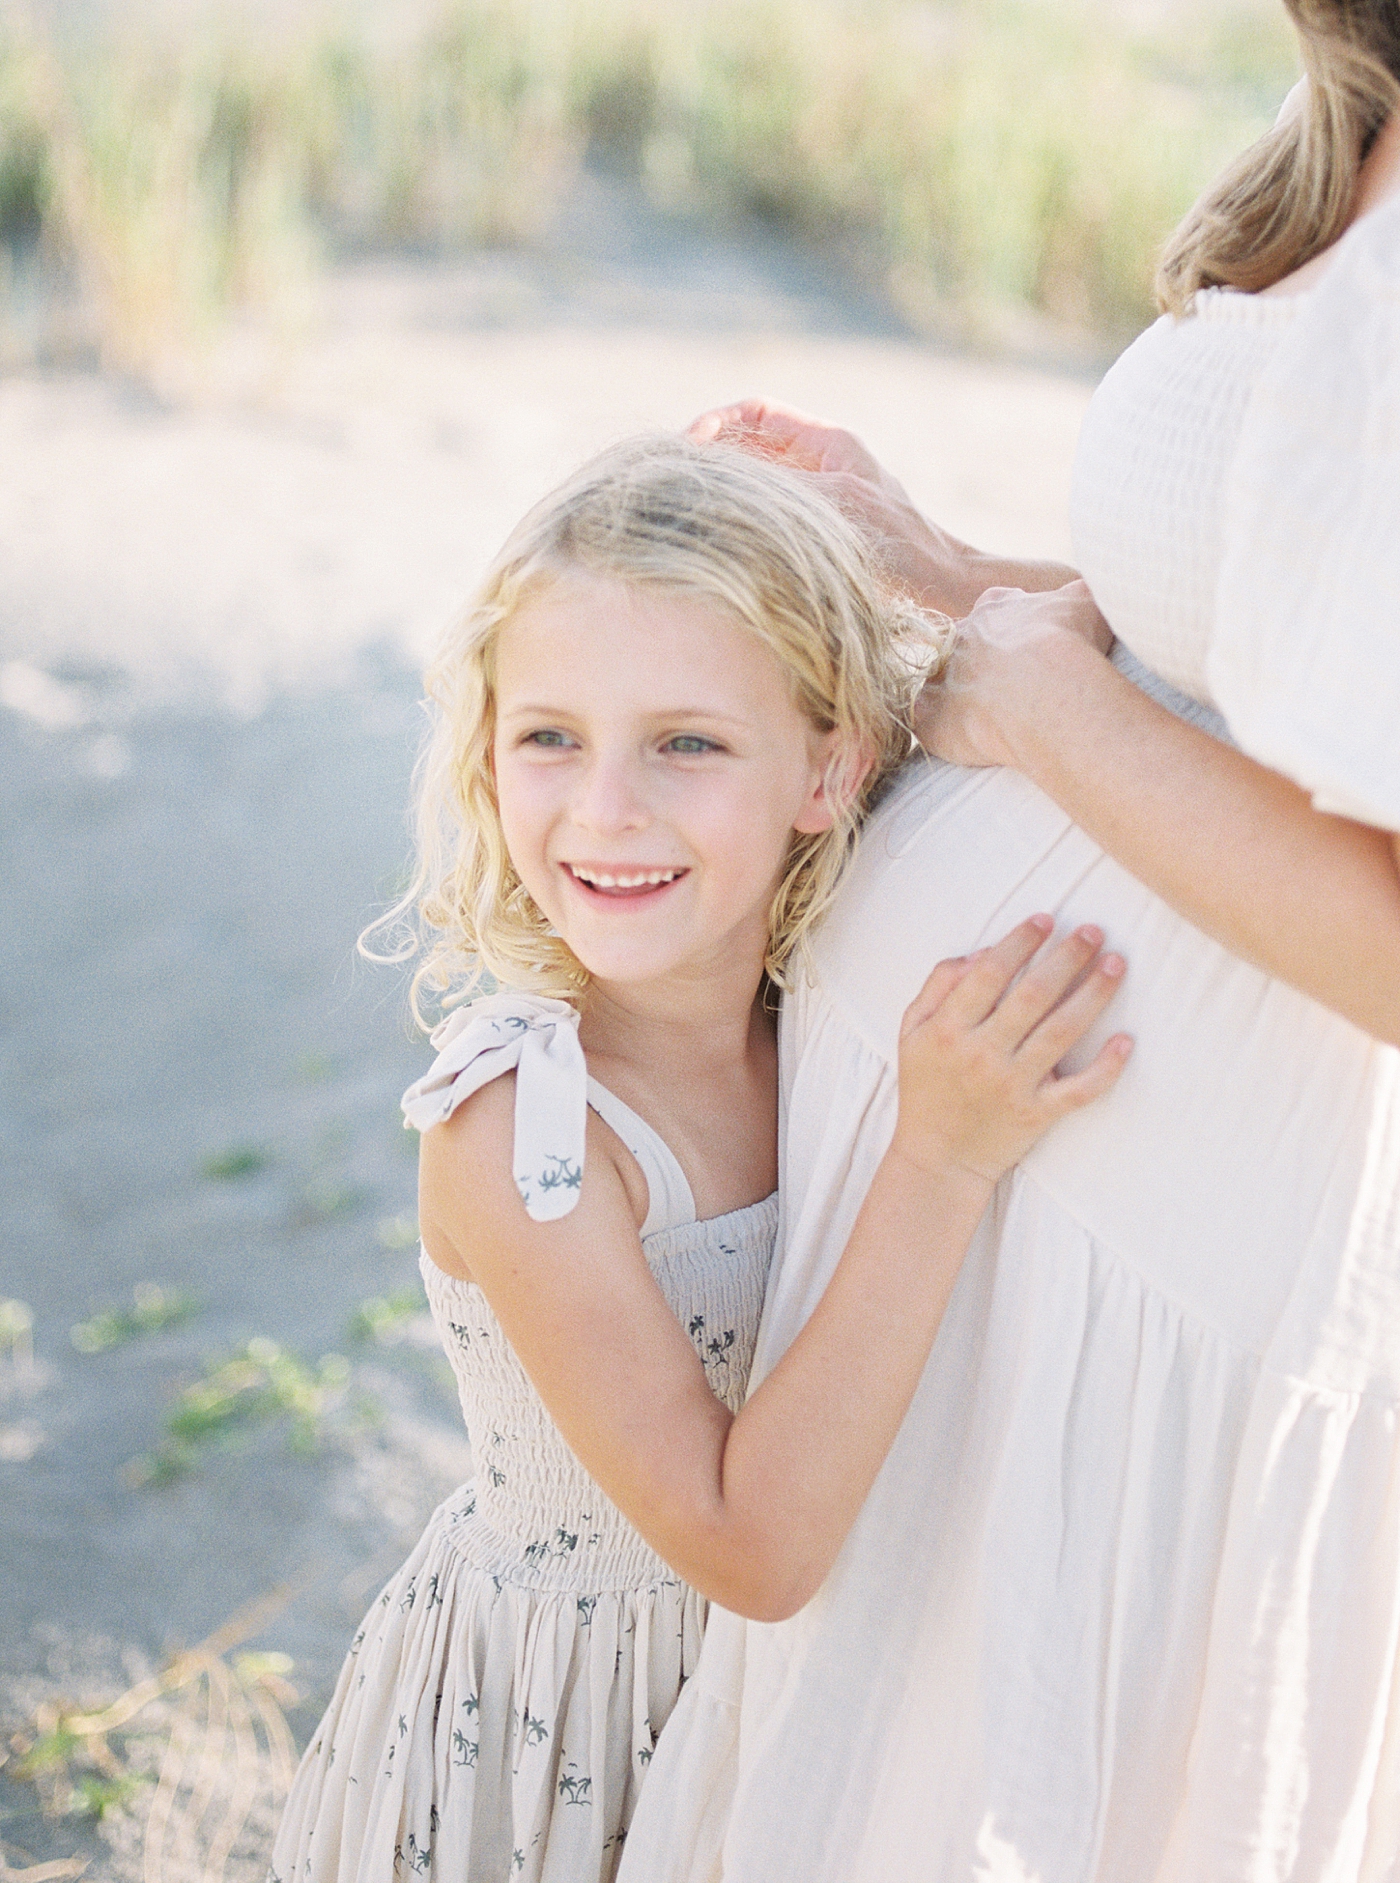 Mom brushing back little girl's blonde hair during their Maternity Session at Folly Beach | Image by Caitlyn Motycka